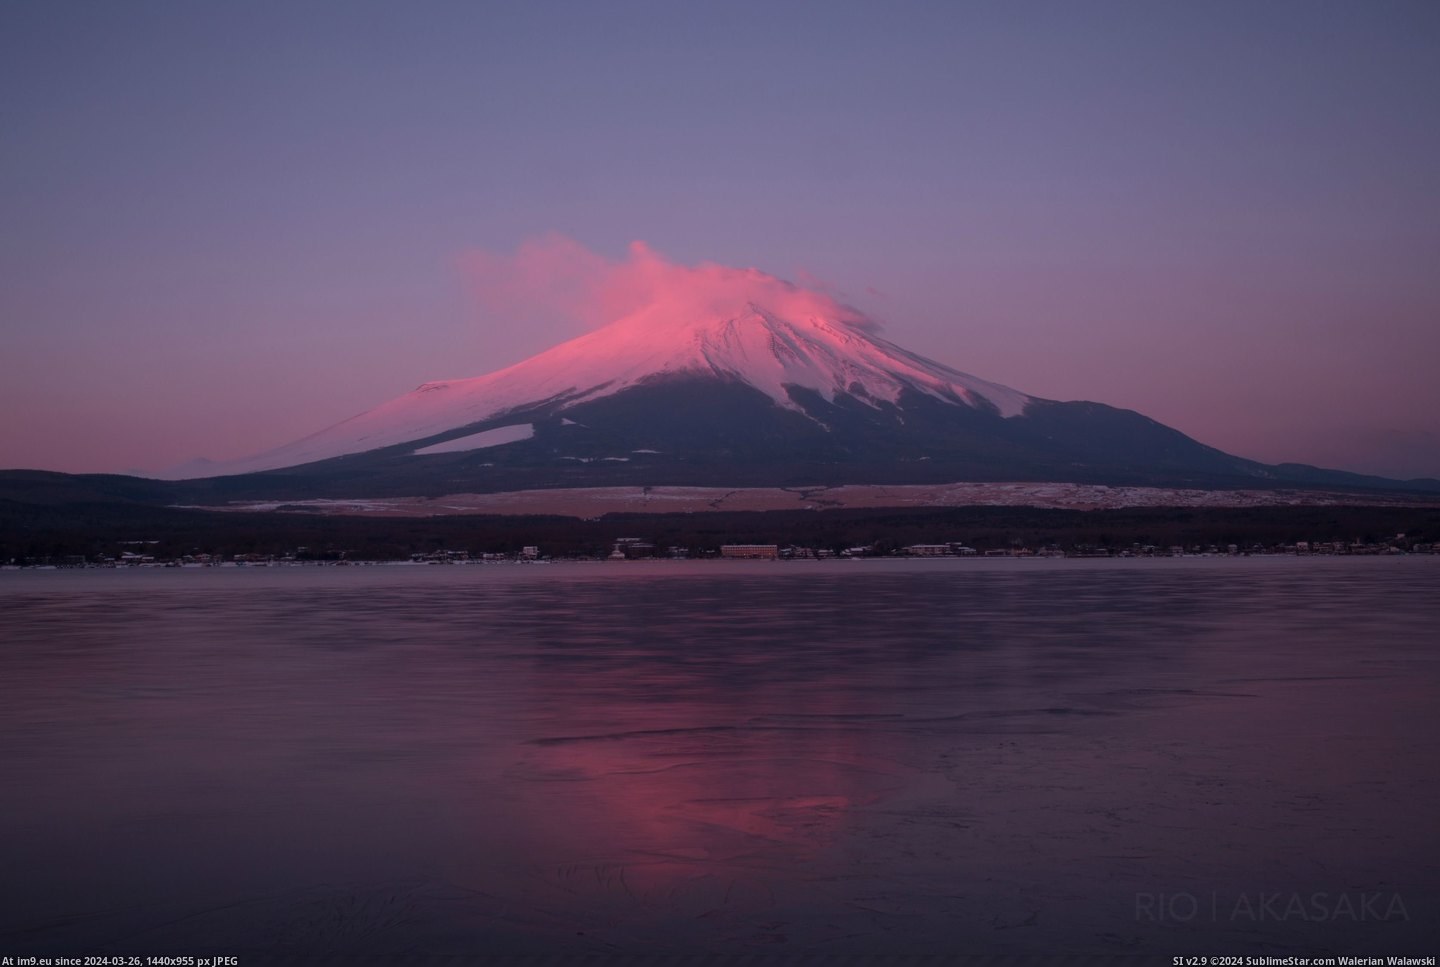 #Morning #Fuji #Fiery #Red [Earthporn] Mt. Fuji, Yamanaka-ko in the morning, fiery red [3345x2230] Pic. (Image of album My r/EARTHPORN favs))